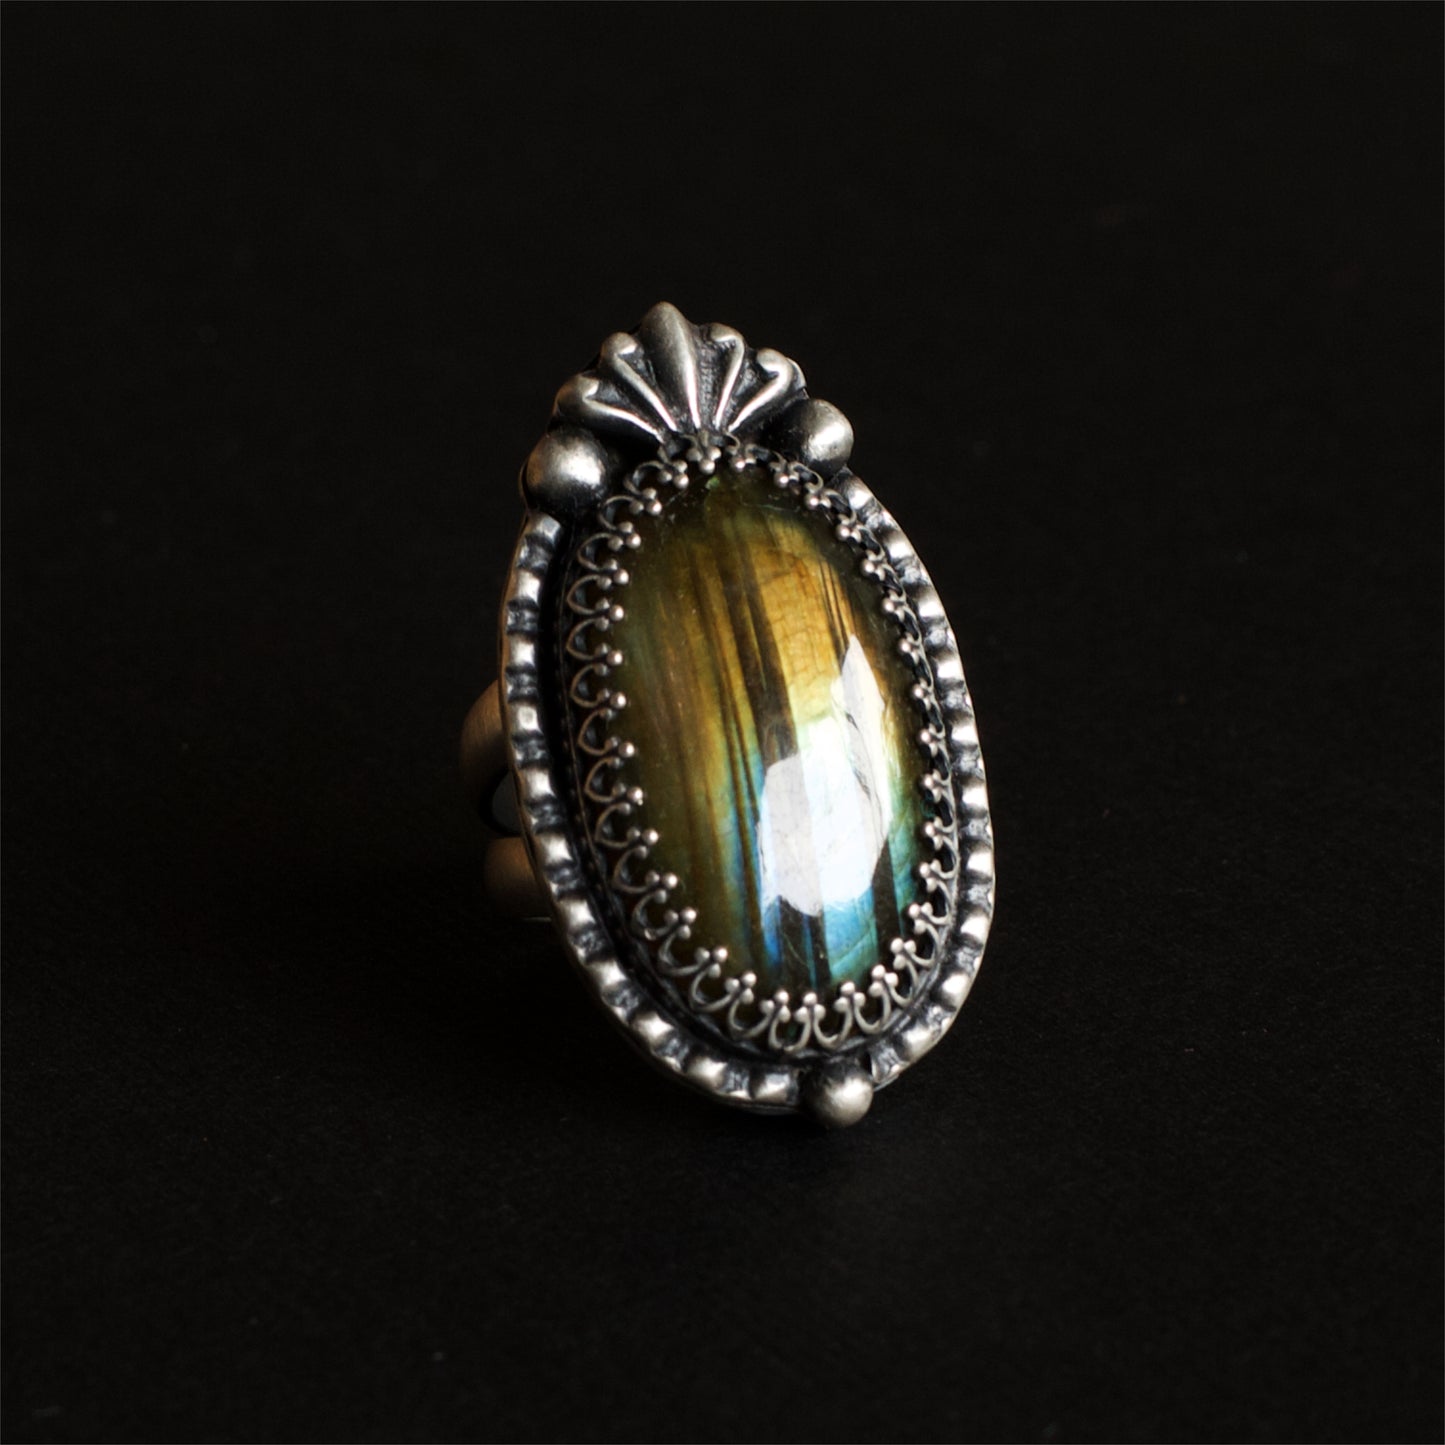 Dust Forest Rainbow Labradorite Ring - Size: 6 1/2 or M 1/2